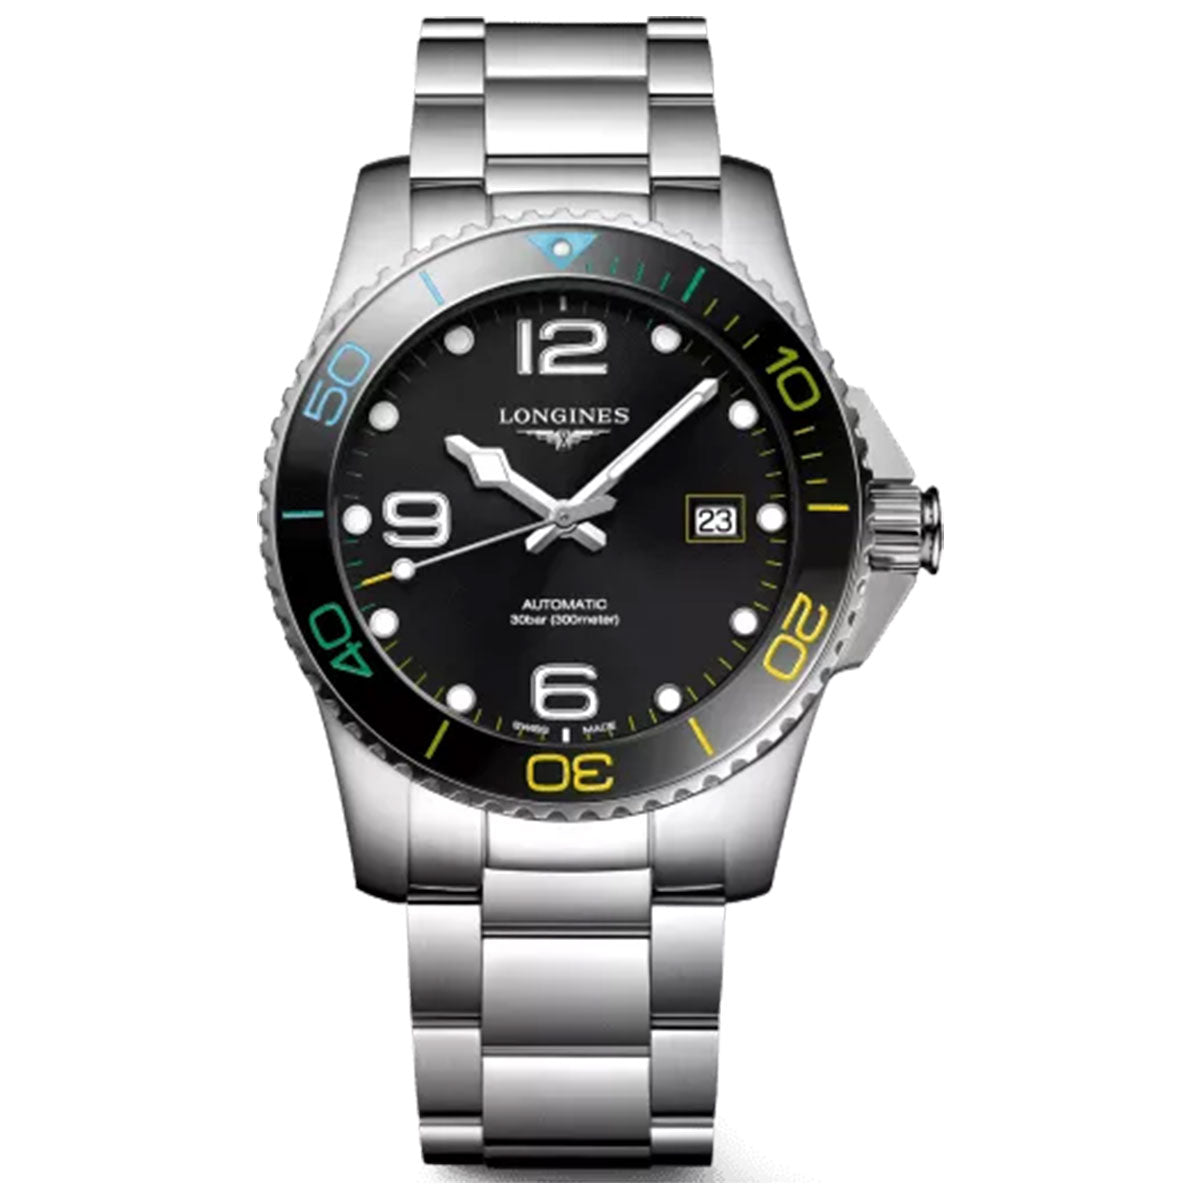 Longines HydroConquest XXII Commonwealth Games Automatic 41mm Watch